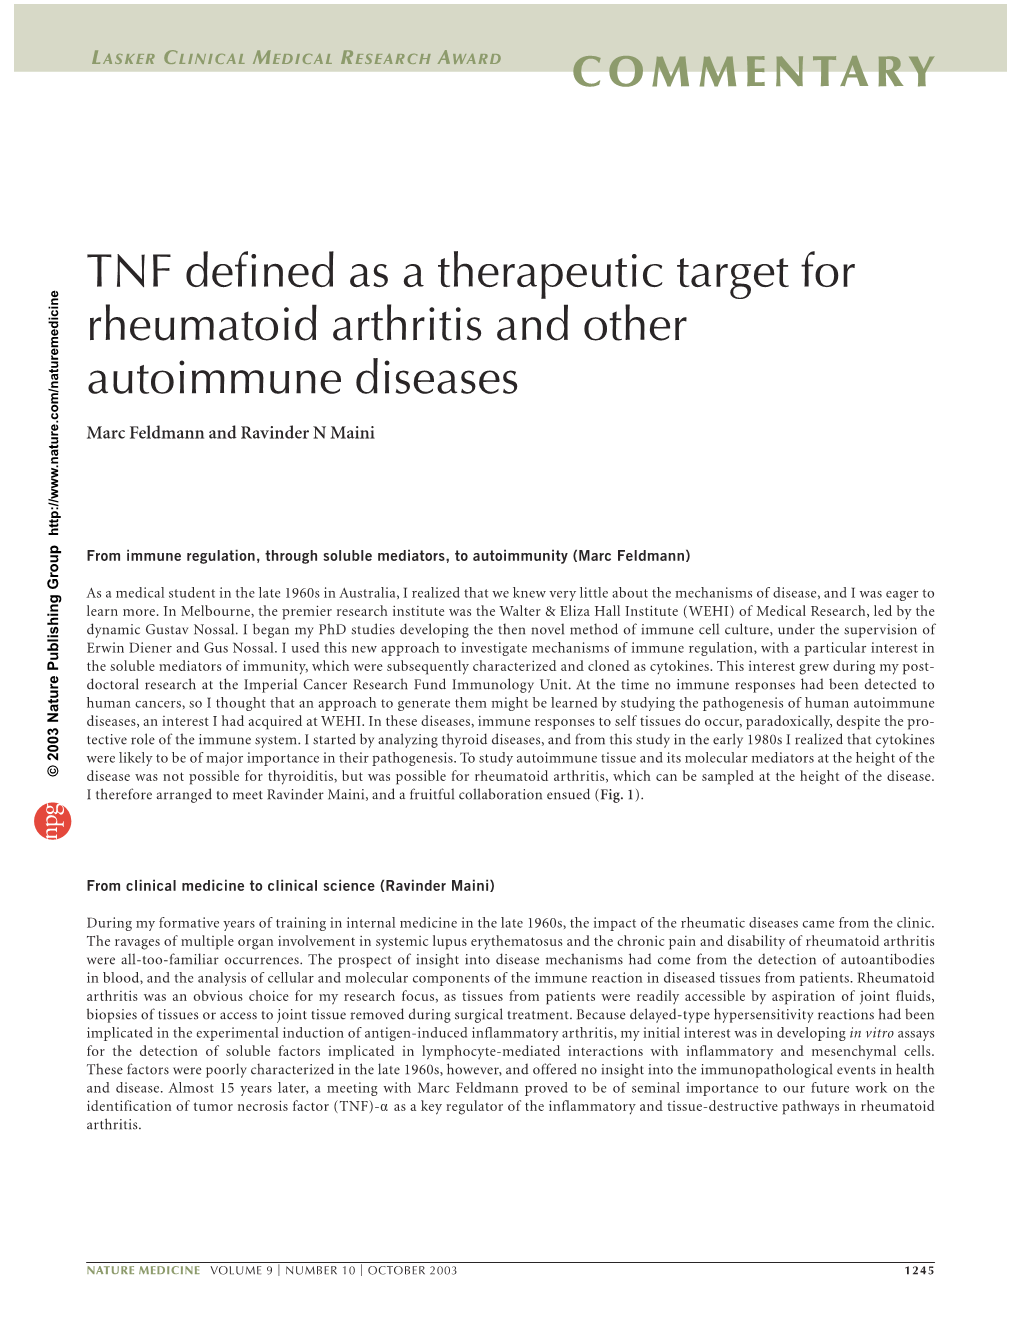 TNF Defined As a Therapeutic Target for Rheumatoid Arthritis and Other Autoimmune Diseases